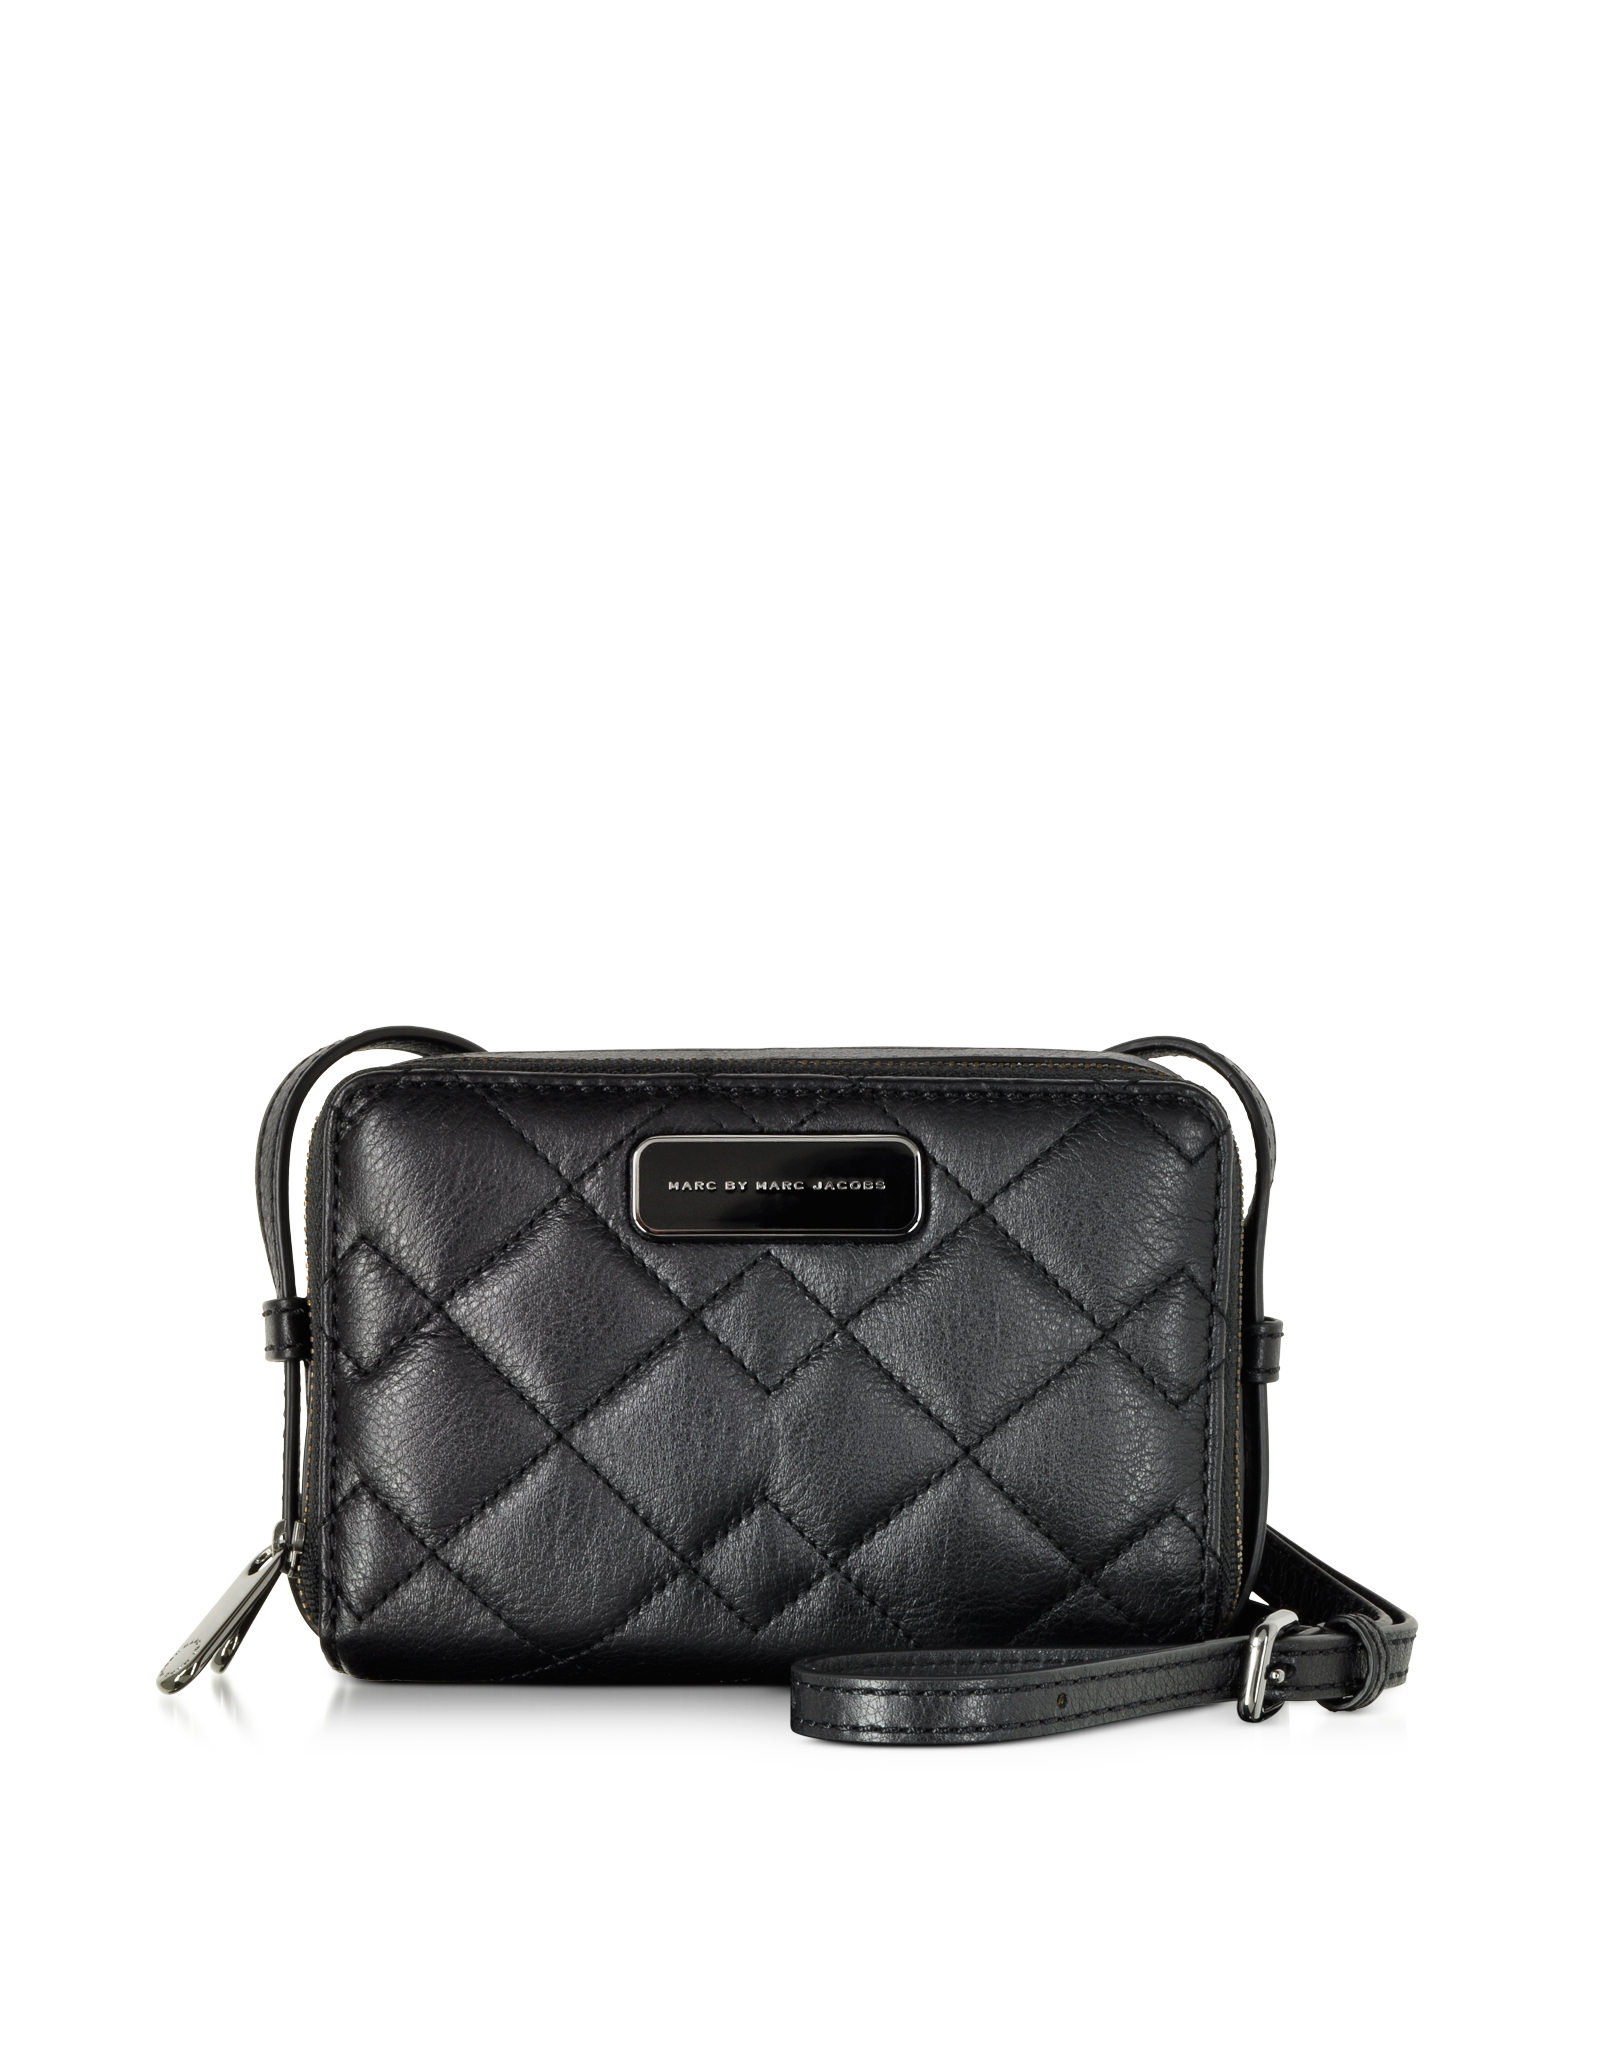 Marc by marc jacobs Sophisticato Black Quilted Leather Crossbody Bag in ...